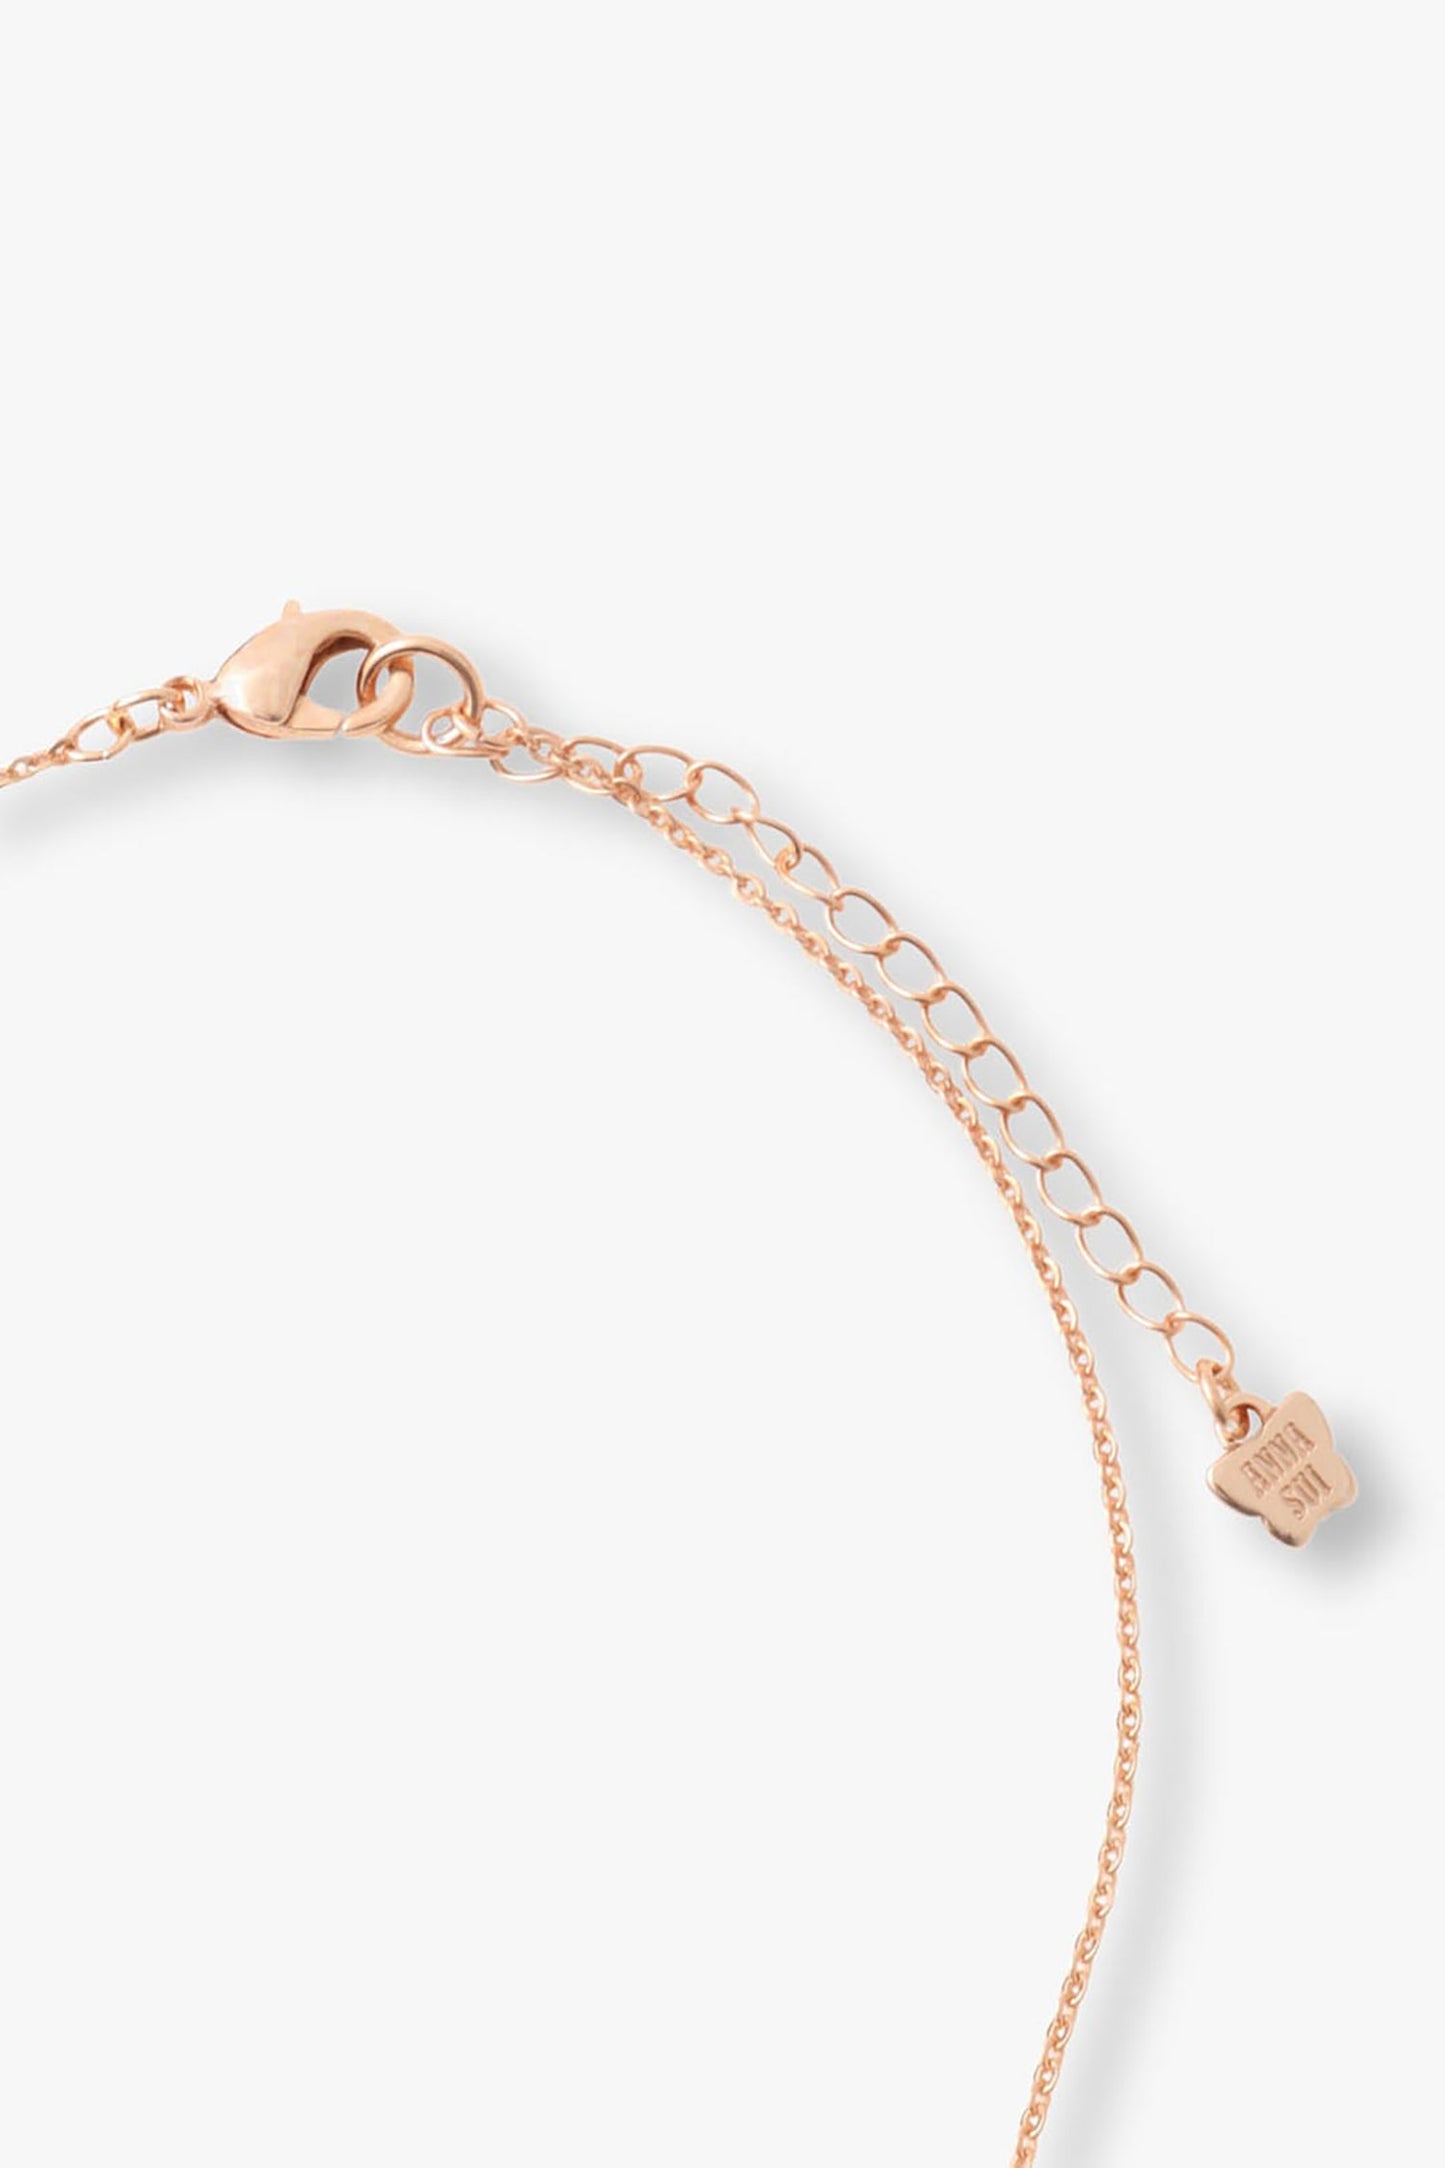 Rose Gold chain, lobster claw clasp lock, Anna Sui imprint logo at the end